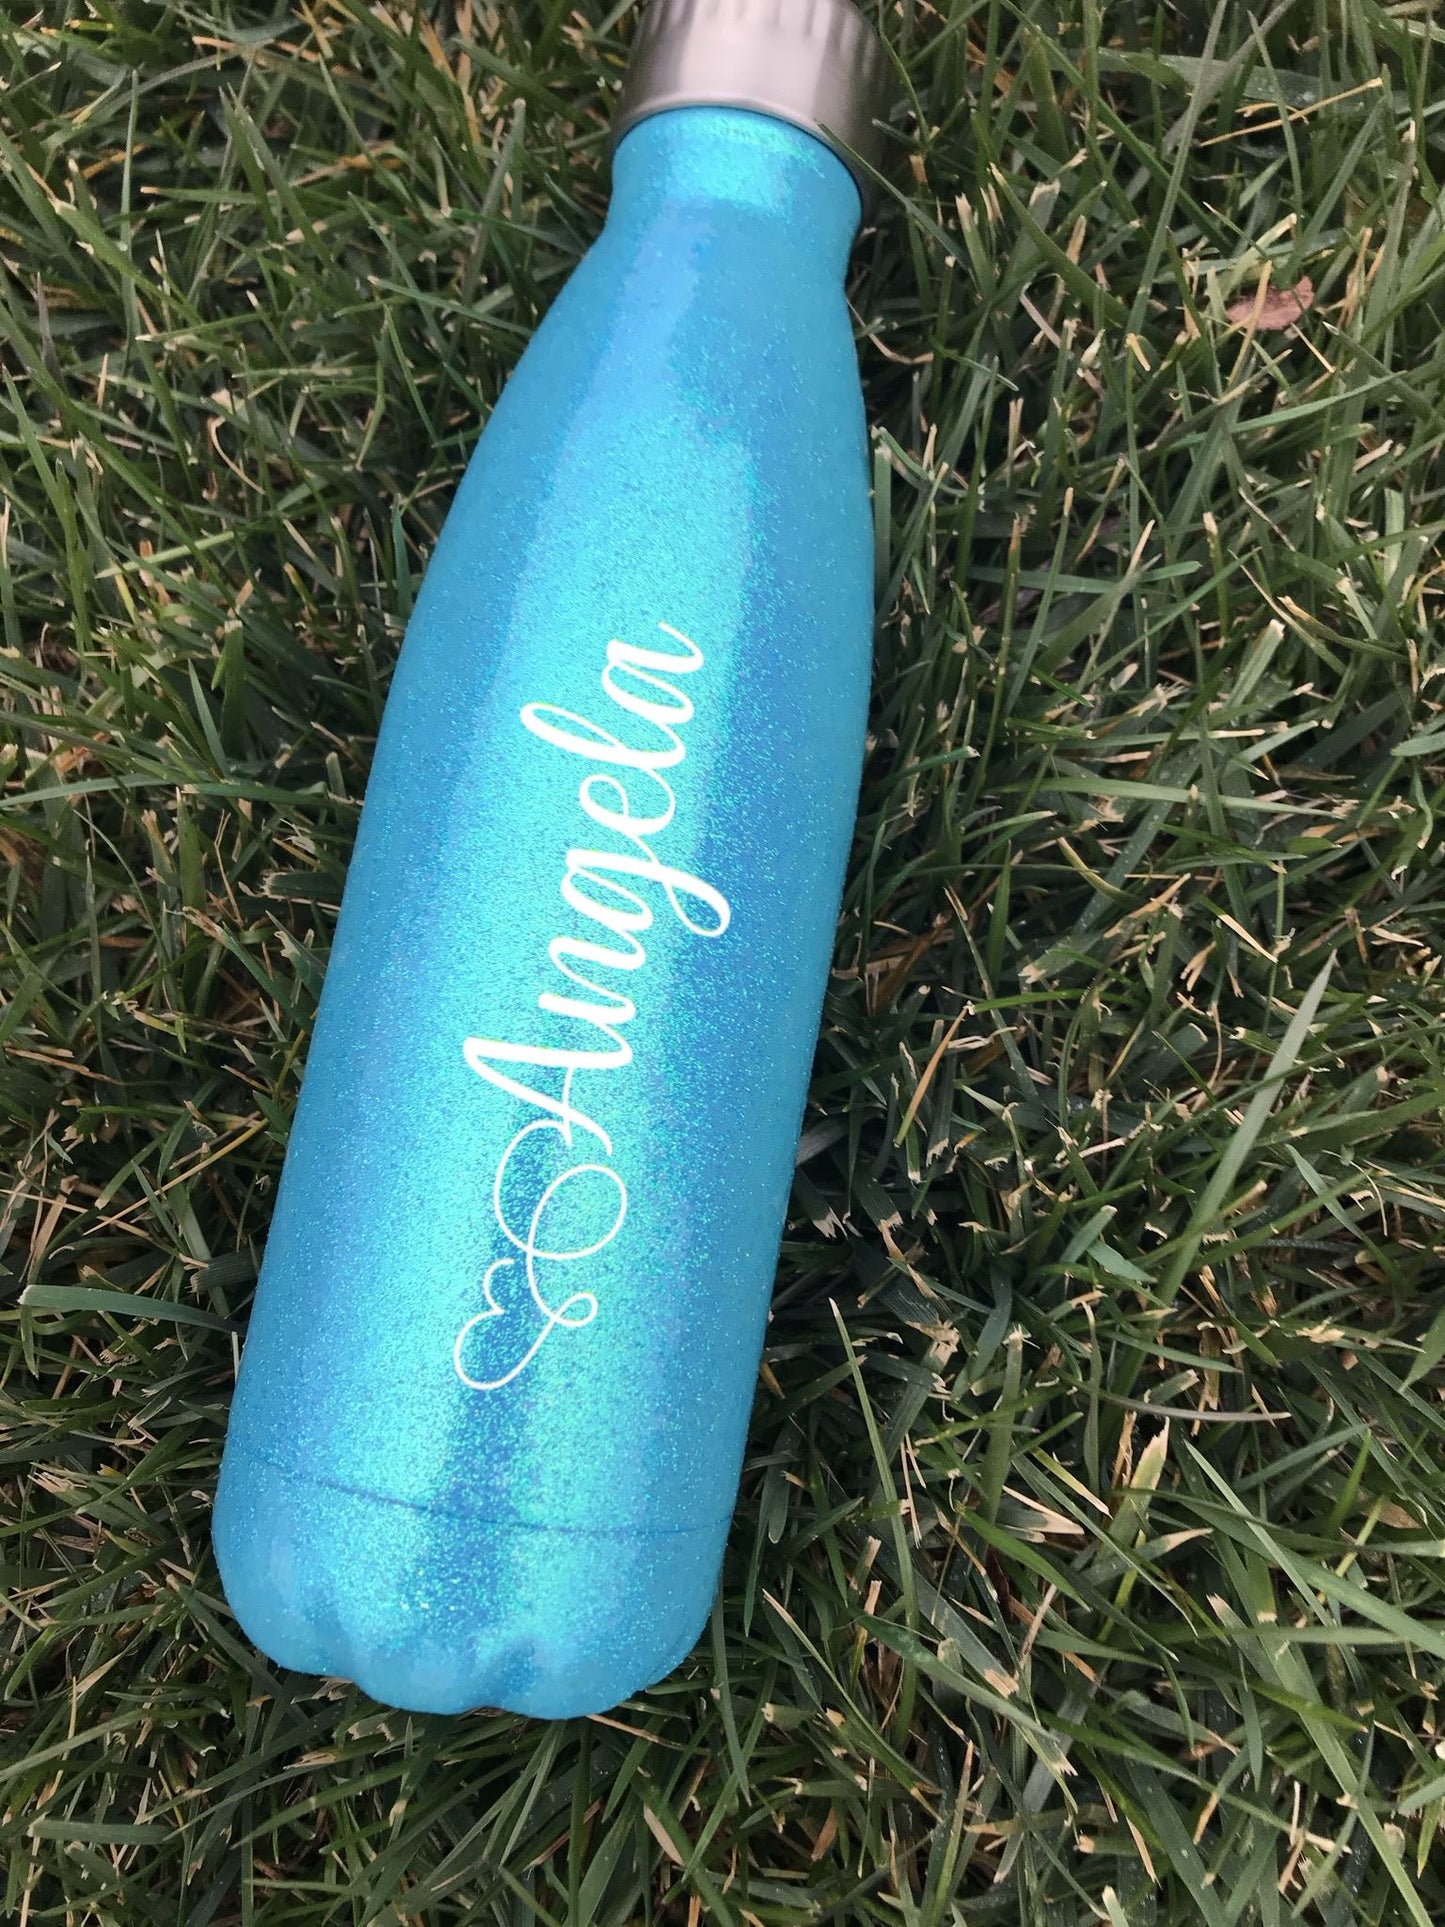 Stainless Steel Water Bottle Water Bottle B1ack By Design LLC Holographic Teal Glitter Name 